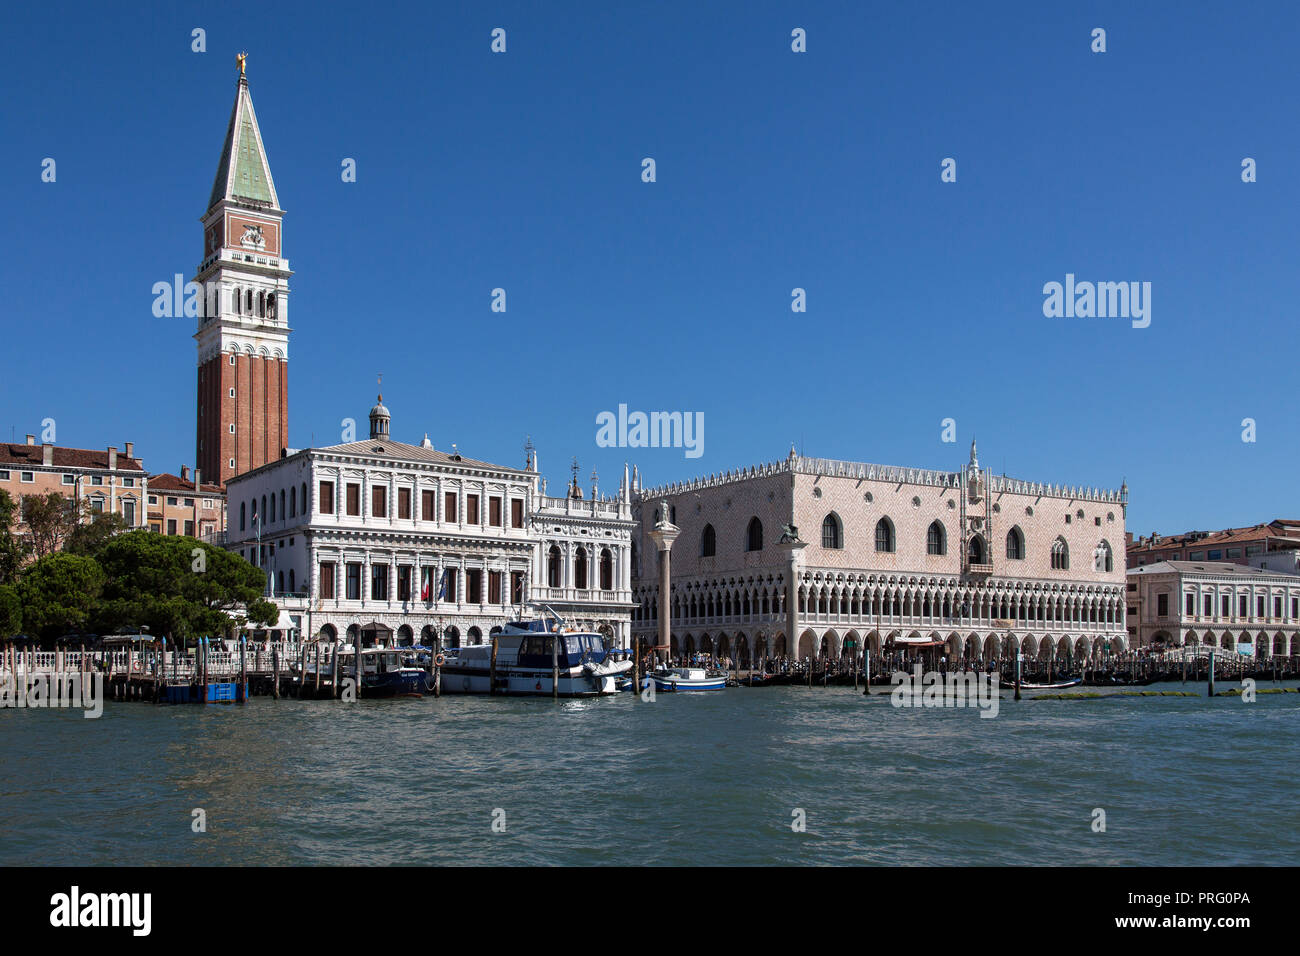 St Mark's Square, the Biblioteca, the Doge's Palace and the Campanile in the city of Venice, Italy. Stock Photo